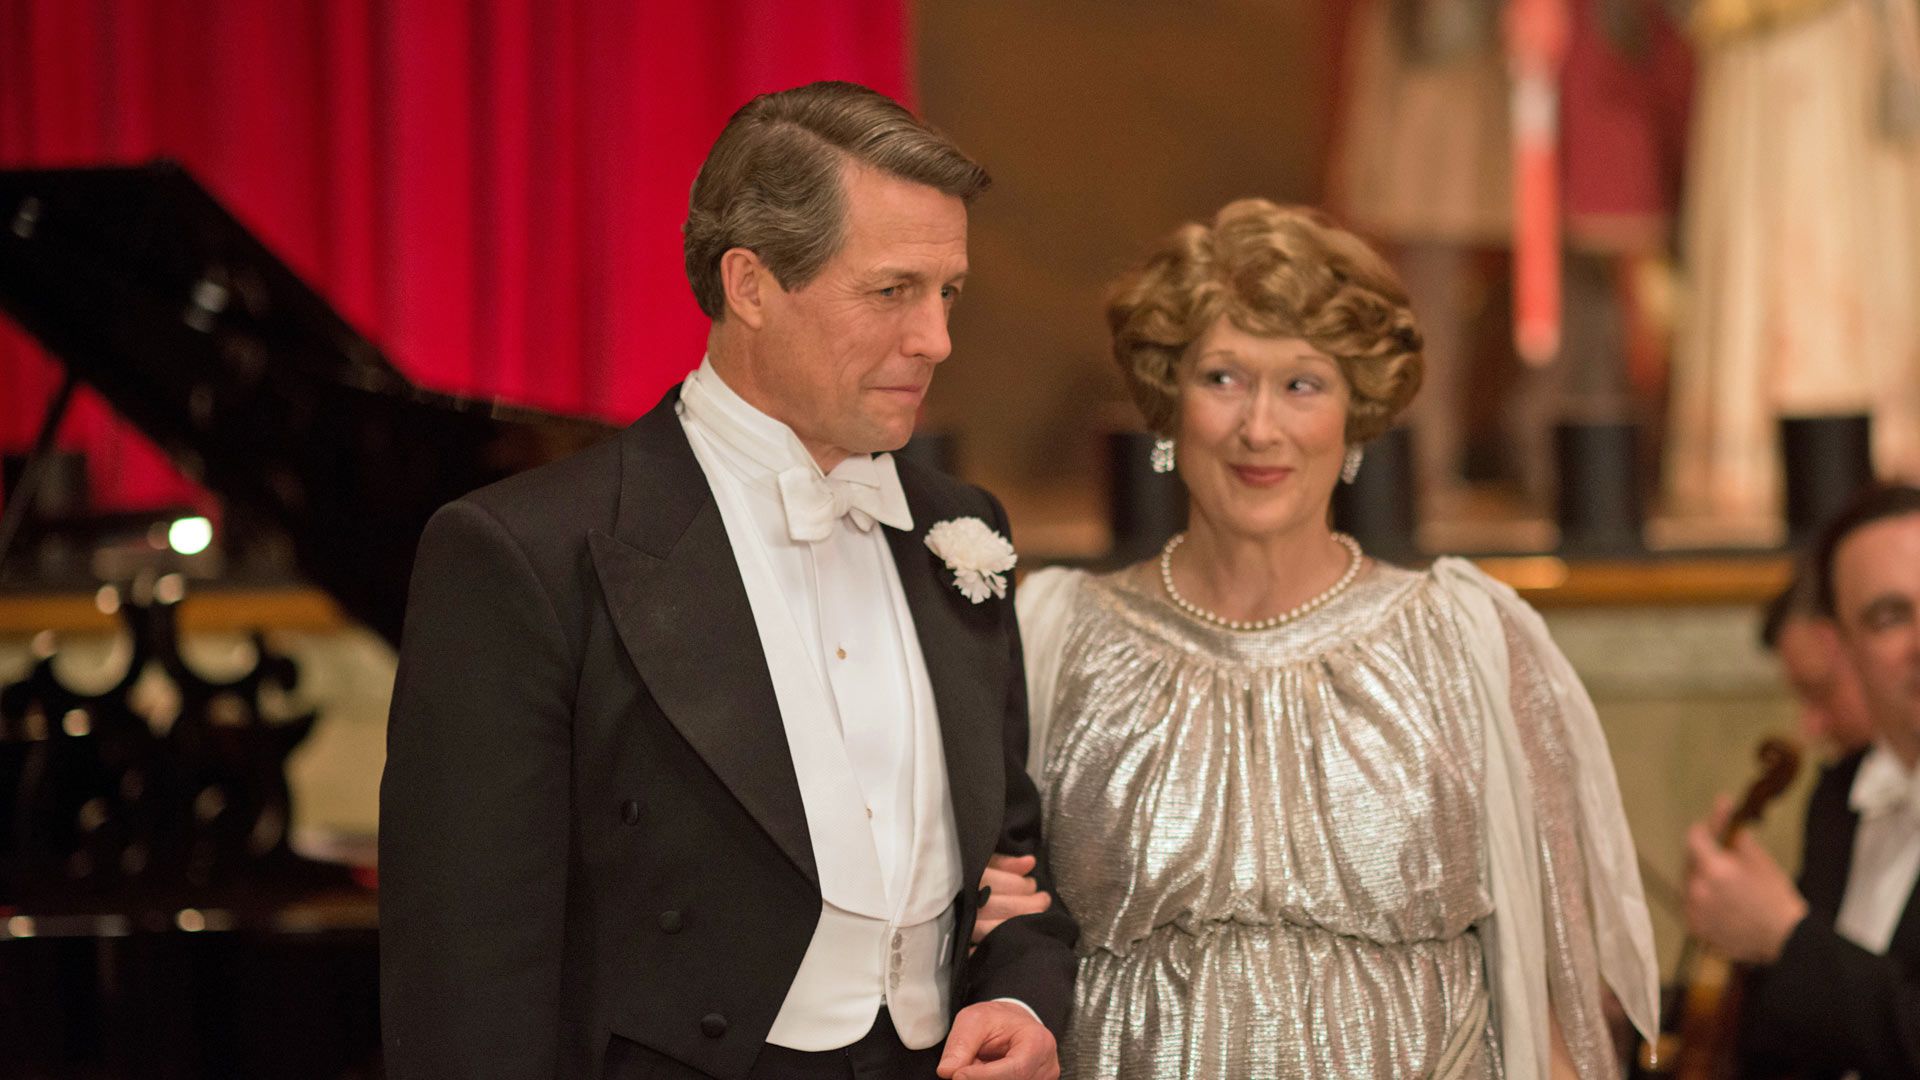 Hugh Grant and Meryl Streep in "Florence Foster Jenkins"